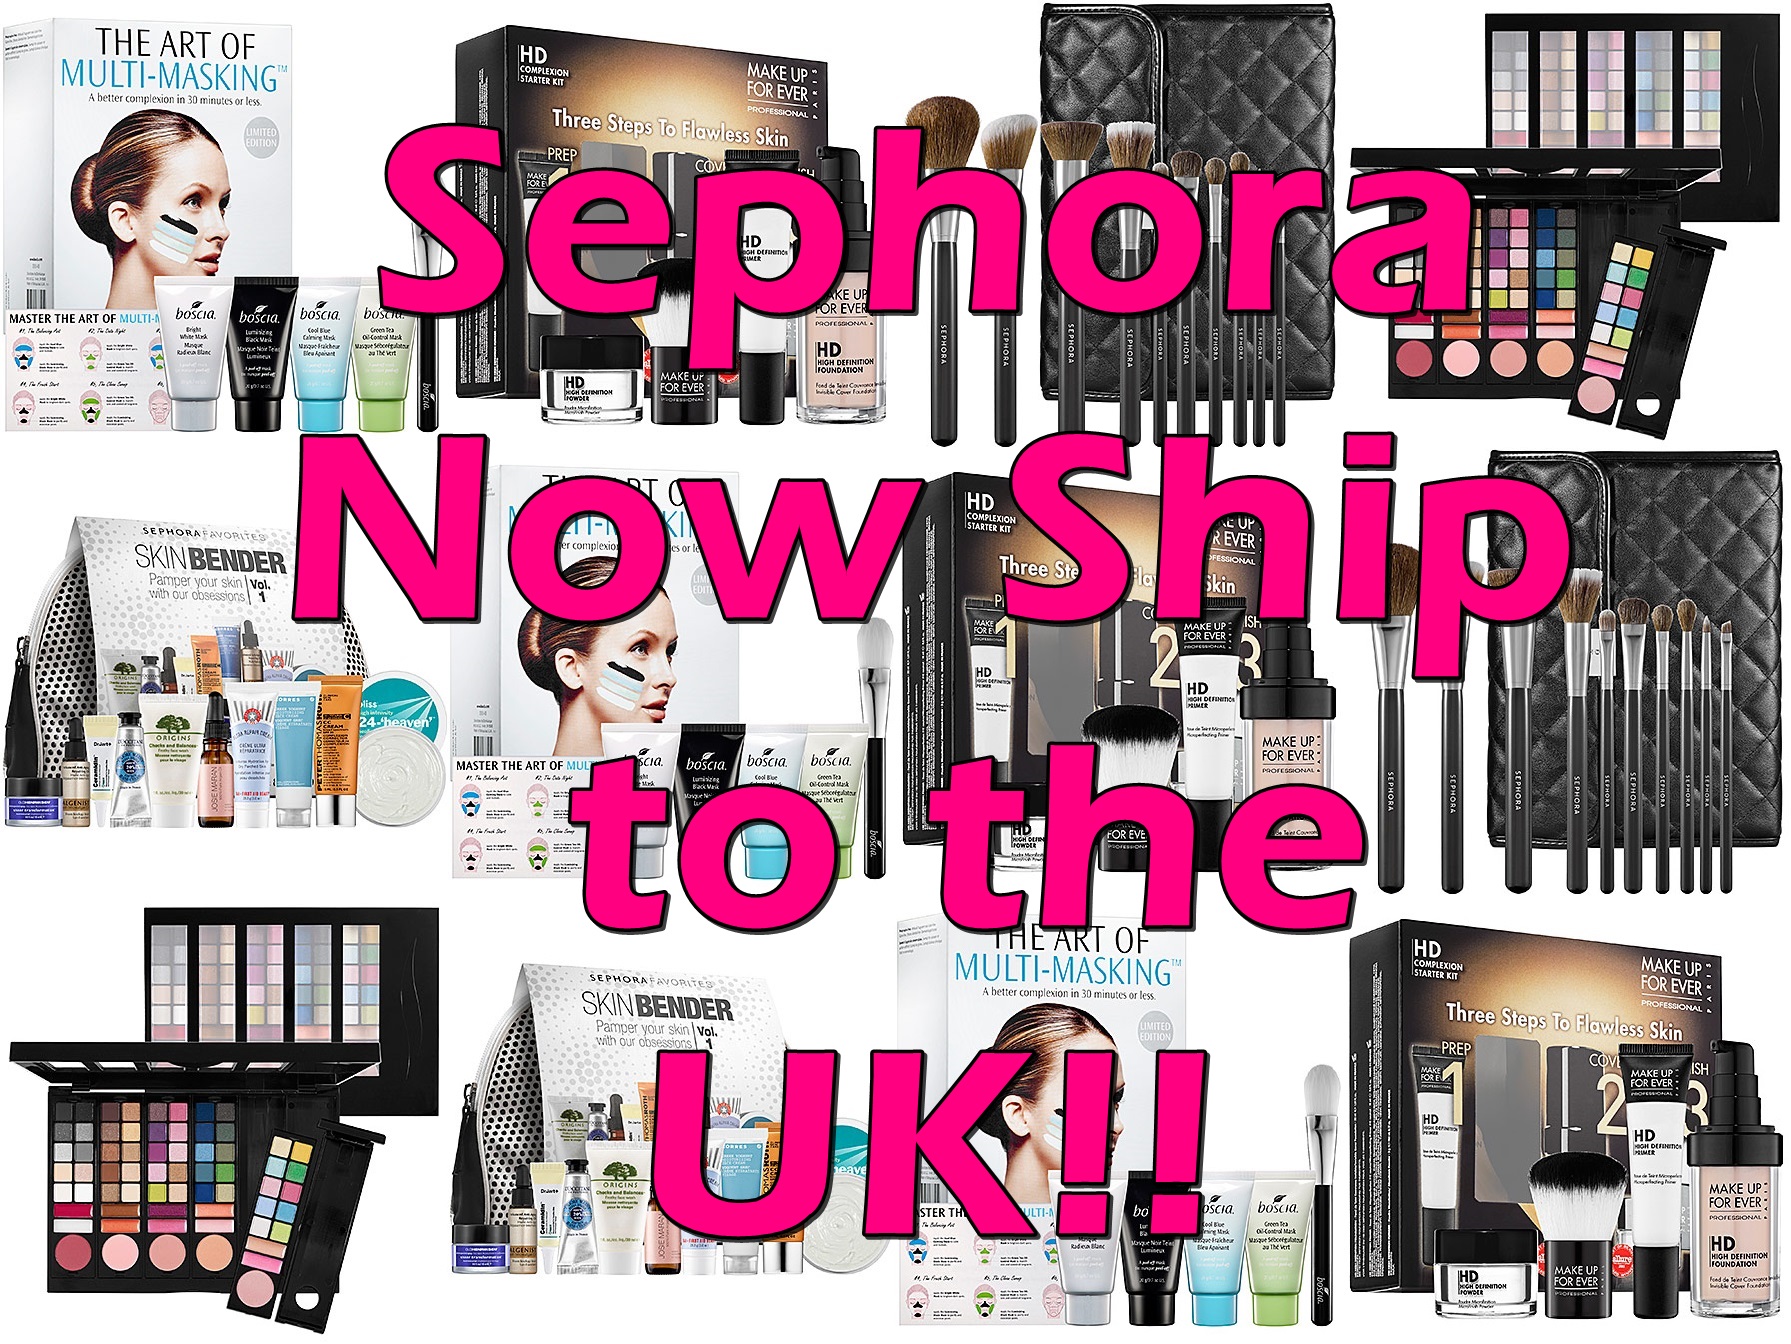 Sephora Now Shipping to the UK